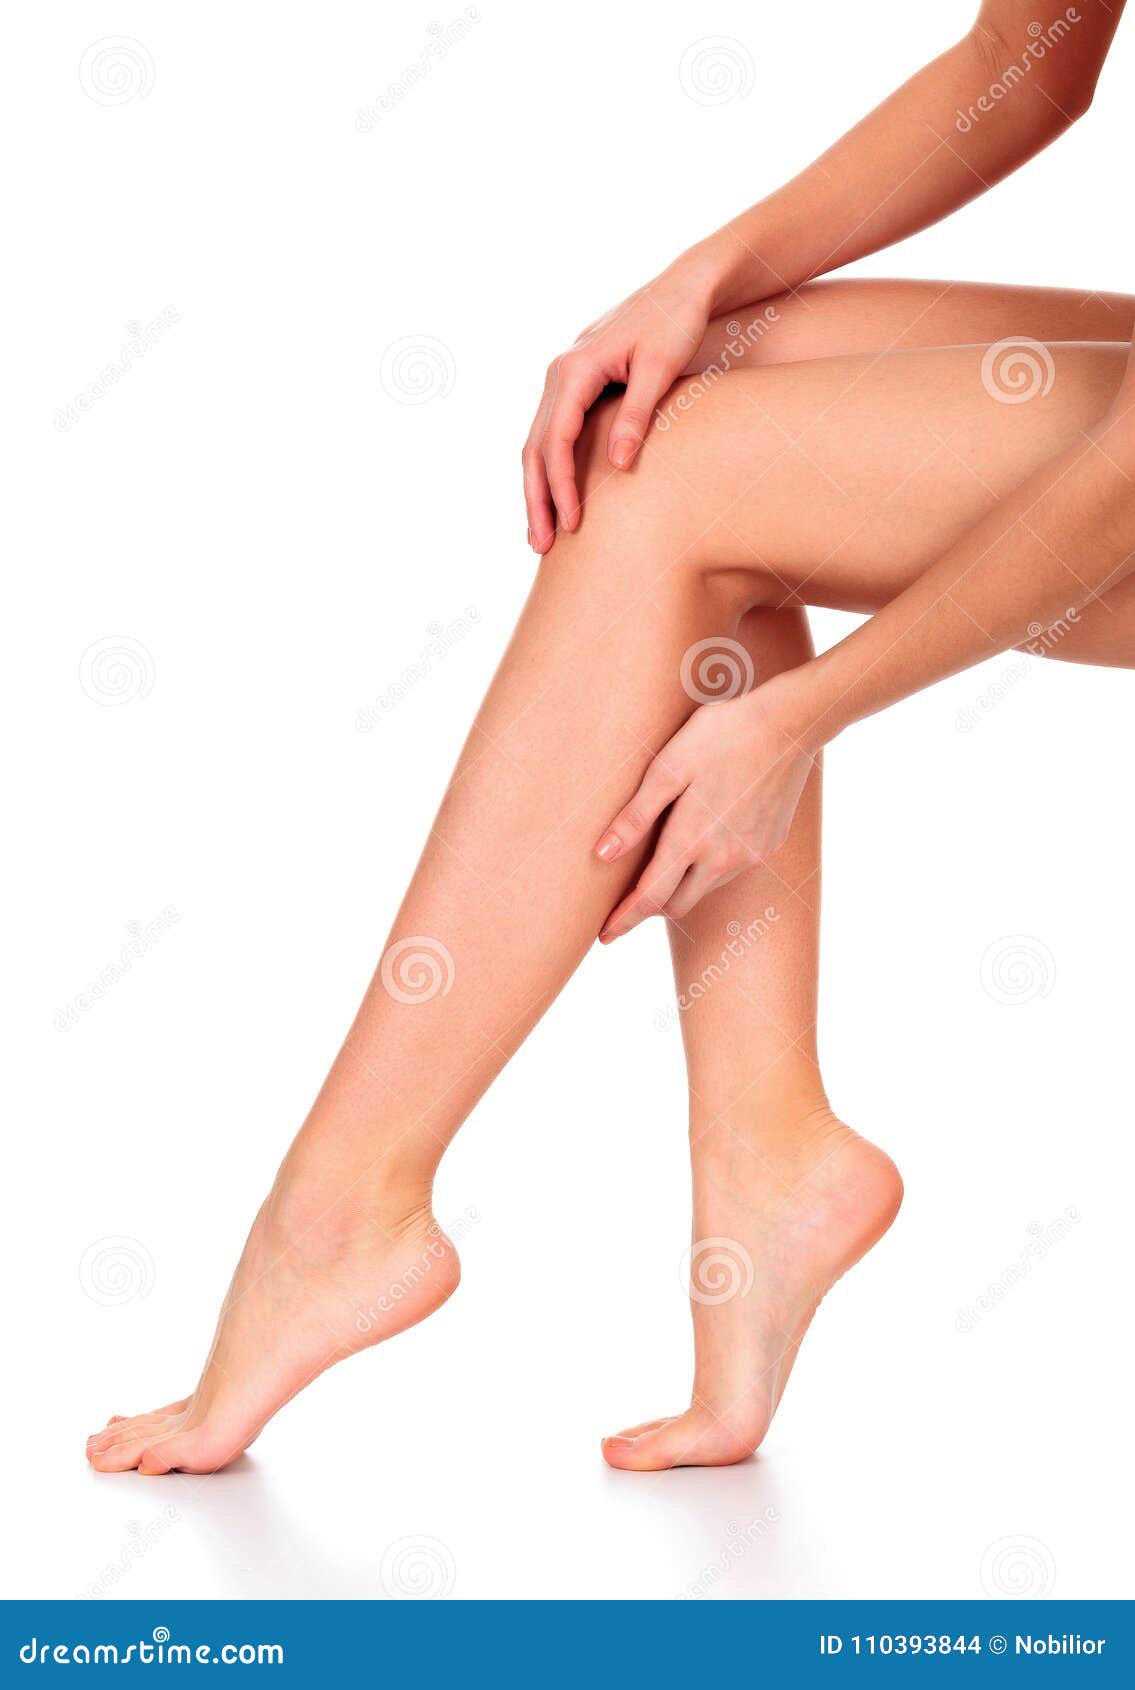 https://thumbs.dreamstime.com/z/beautiful-long-woman-s-legs-hands-smooth-soft-skin-isolated-white-background-110393844.jpg